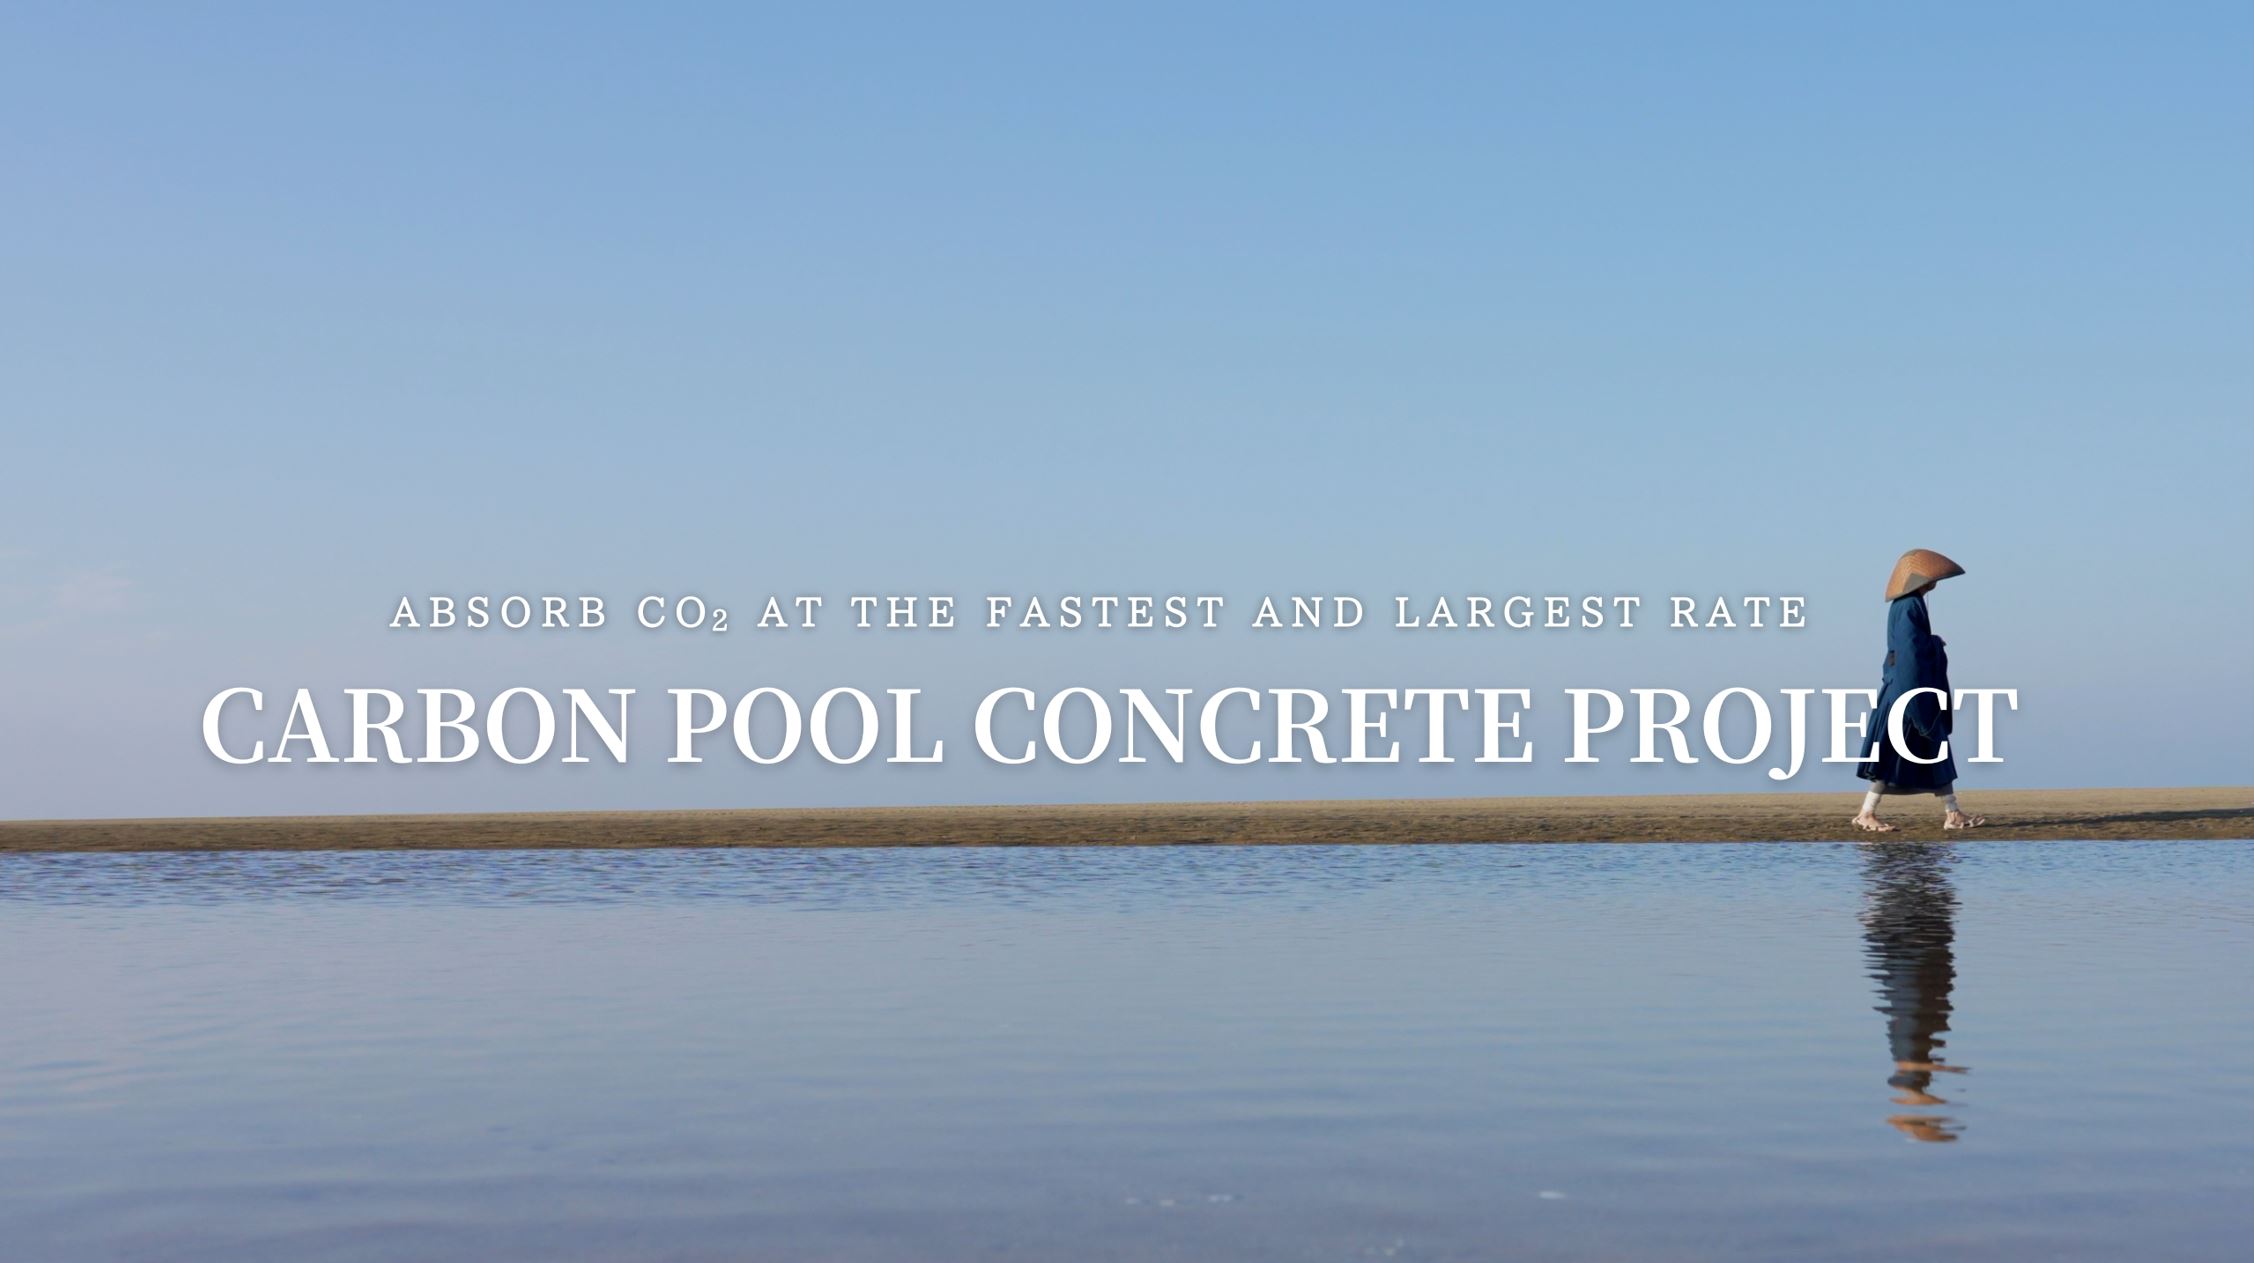 Carbon Pool Concrete Consortium Strengthens Online Presence with a Newly Launched Website